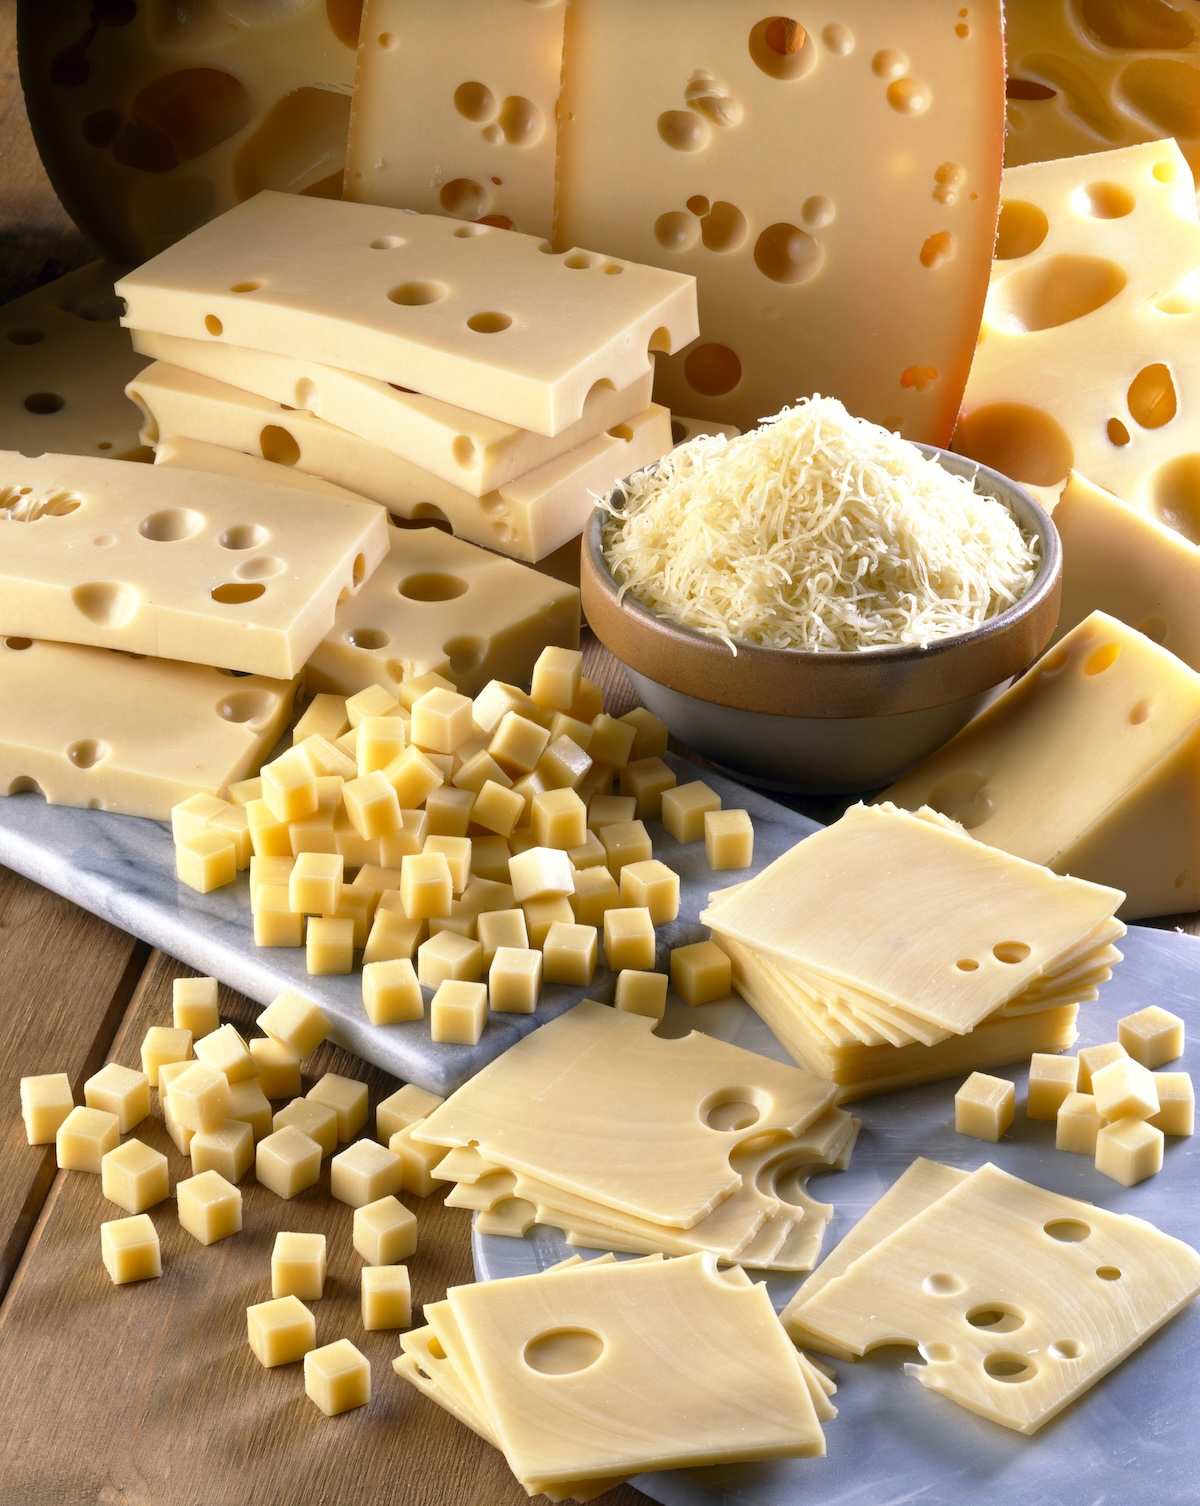 Gruyère, sliced, diced and grated